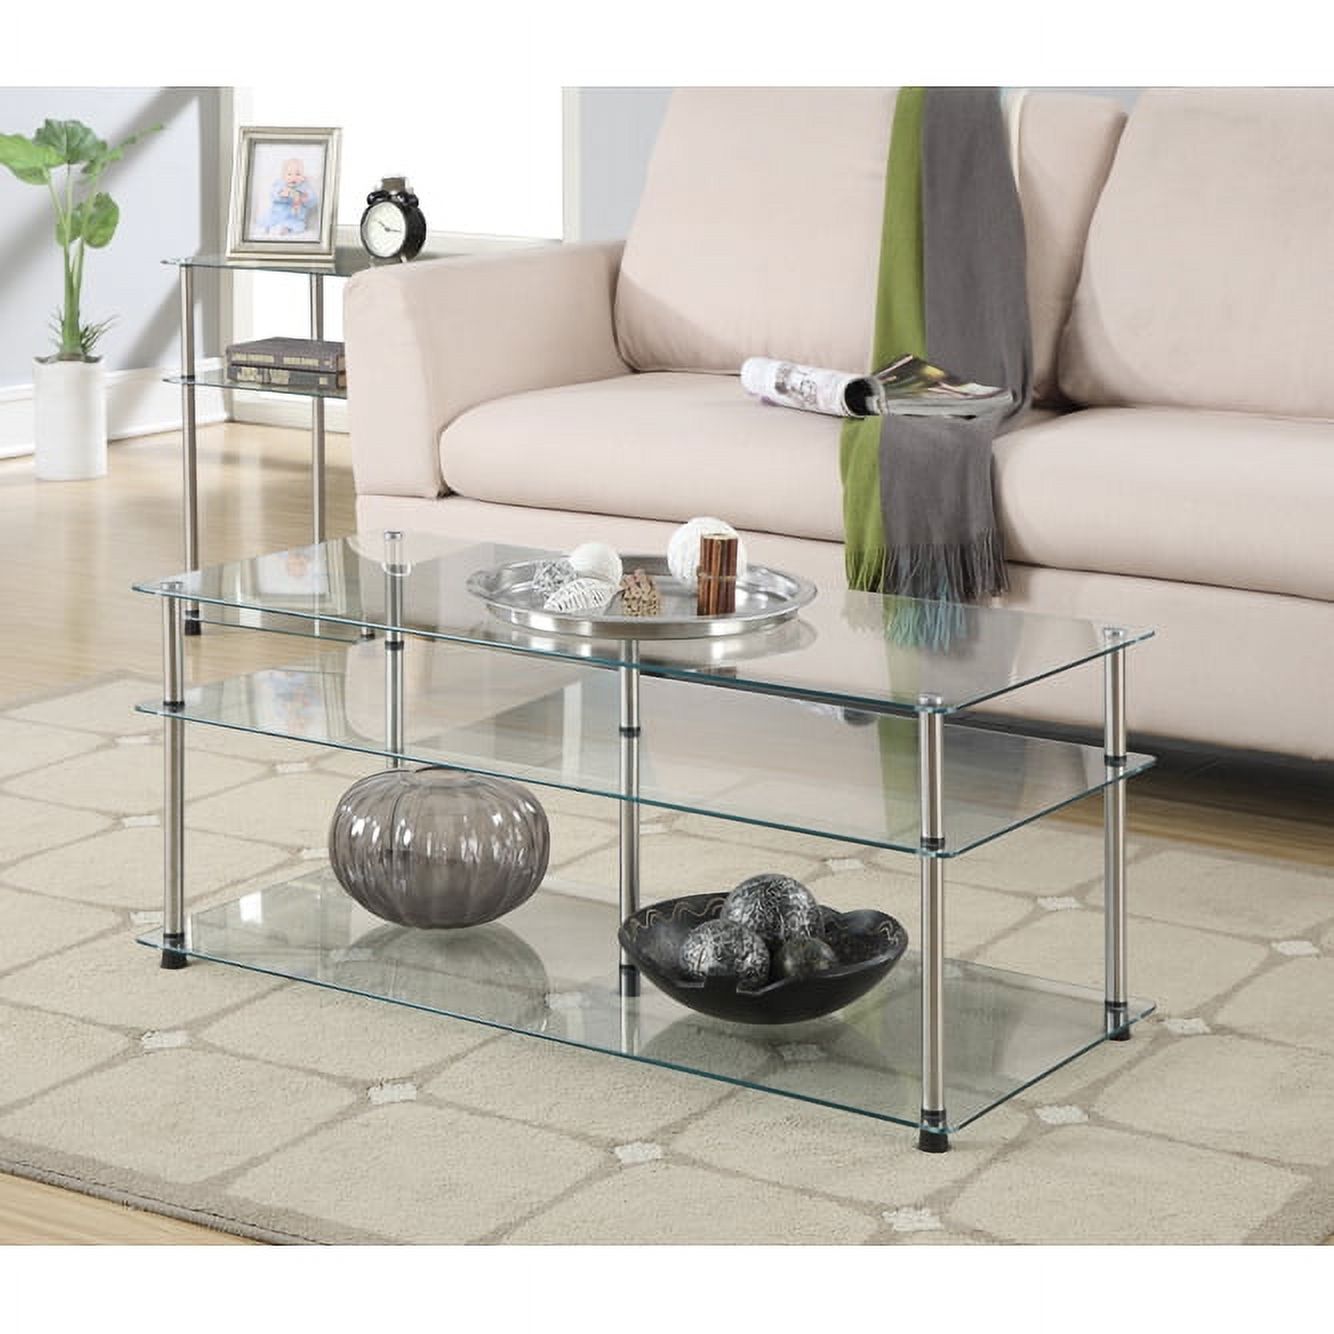 Designs2Go Classic Glass 3 Tier Coffee Table - image 1 of 2